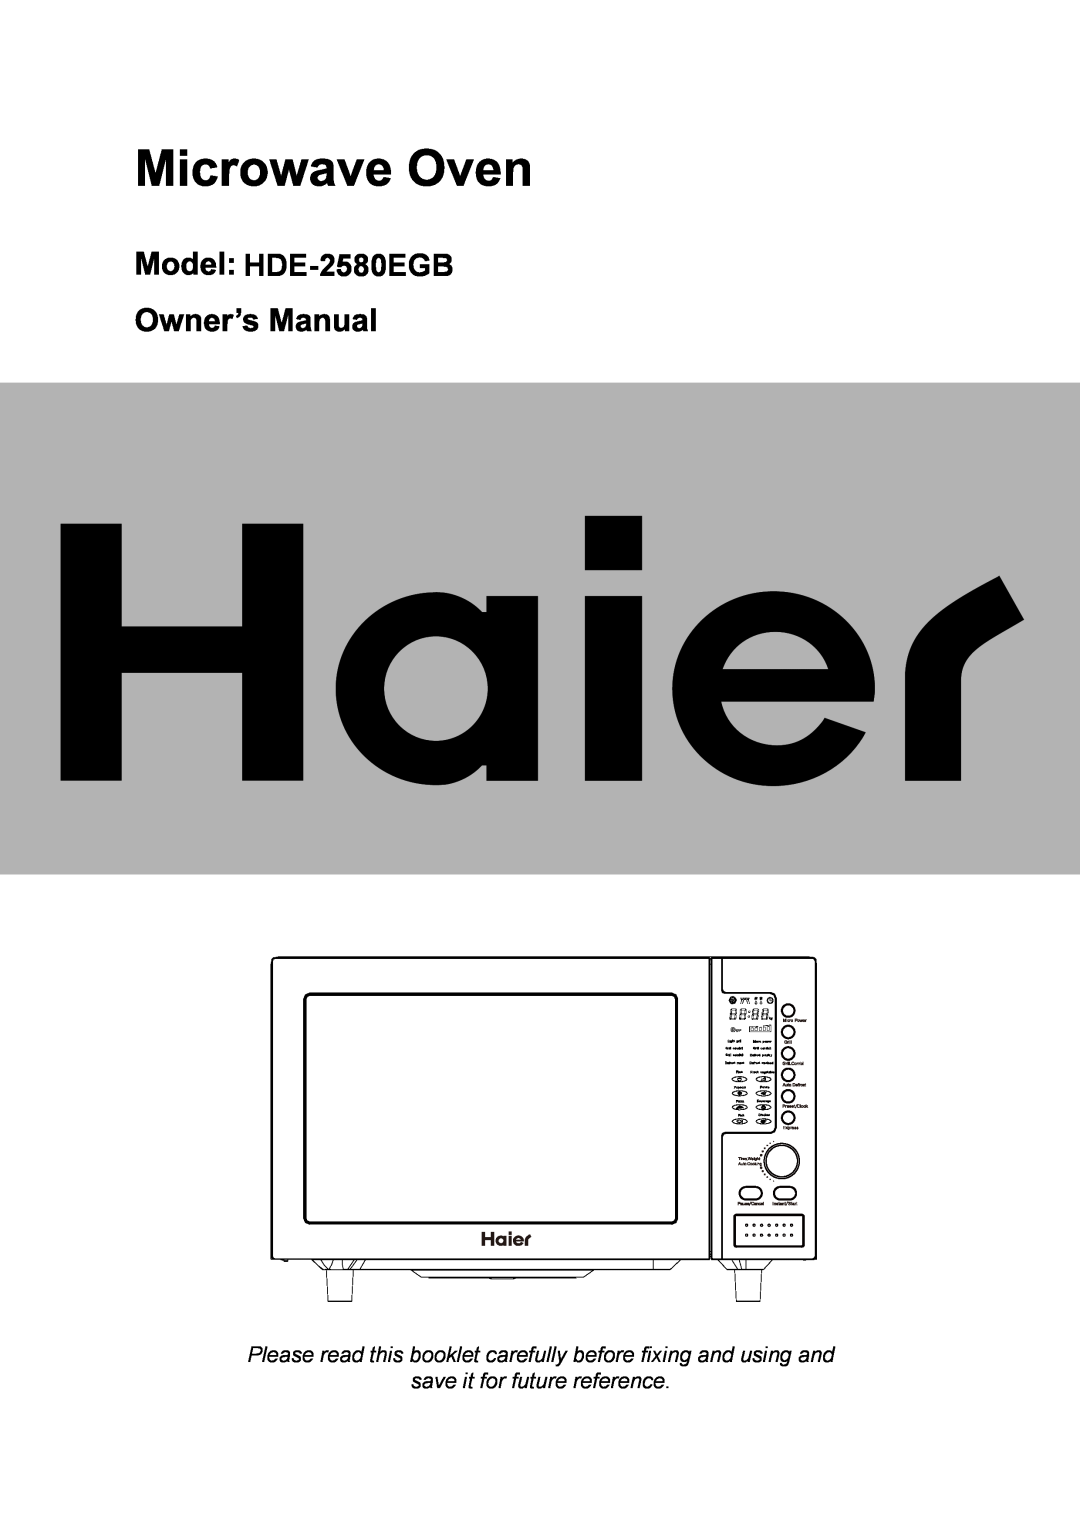 Haier HDE-2580EGB manual Please read this booklet carefully before fixing and using and, save it for future reference 